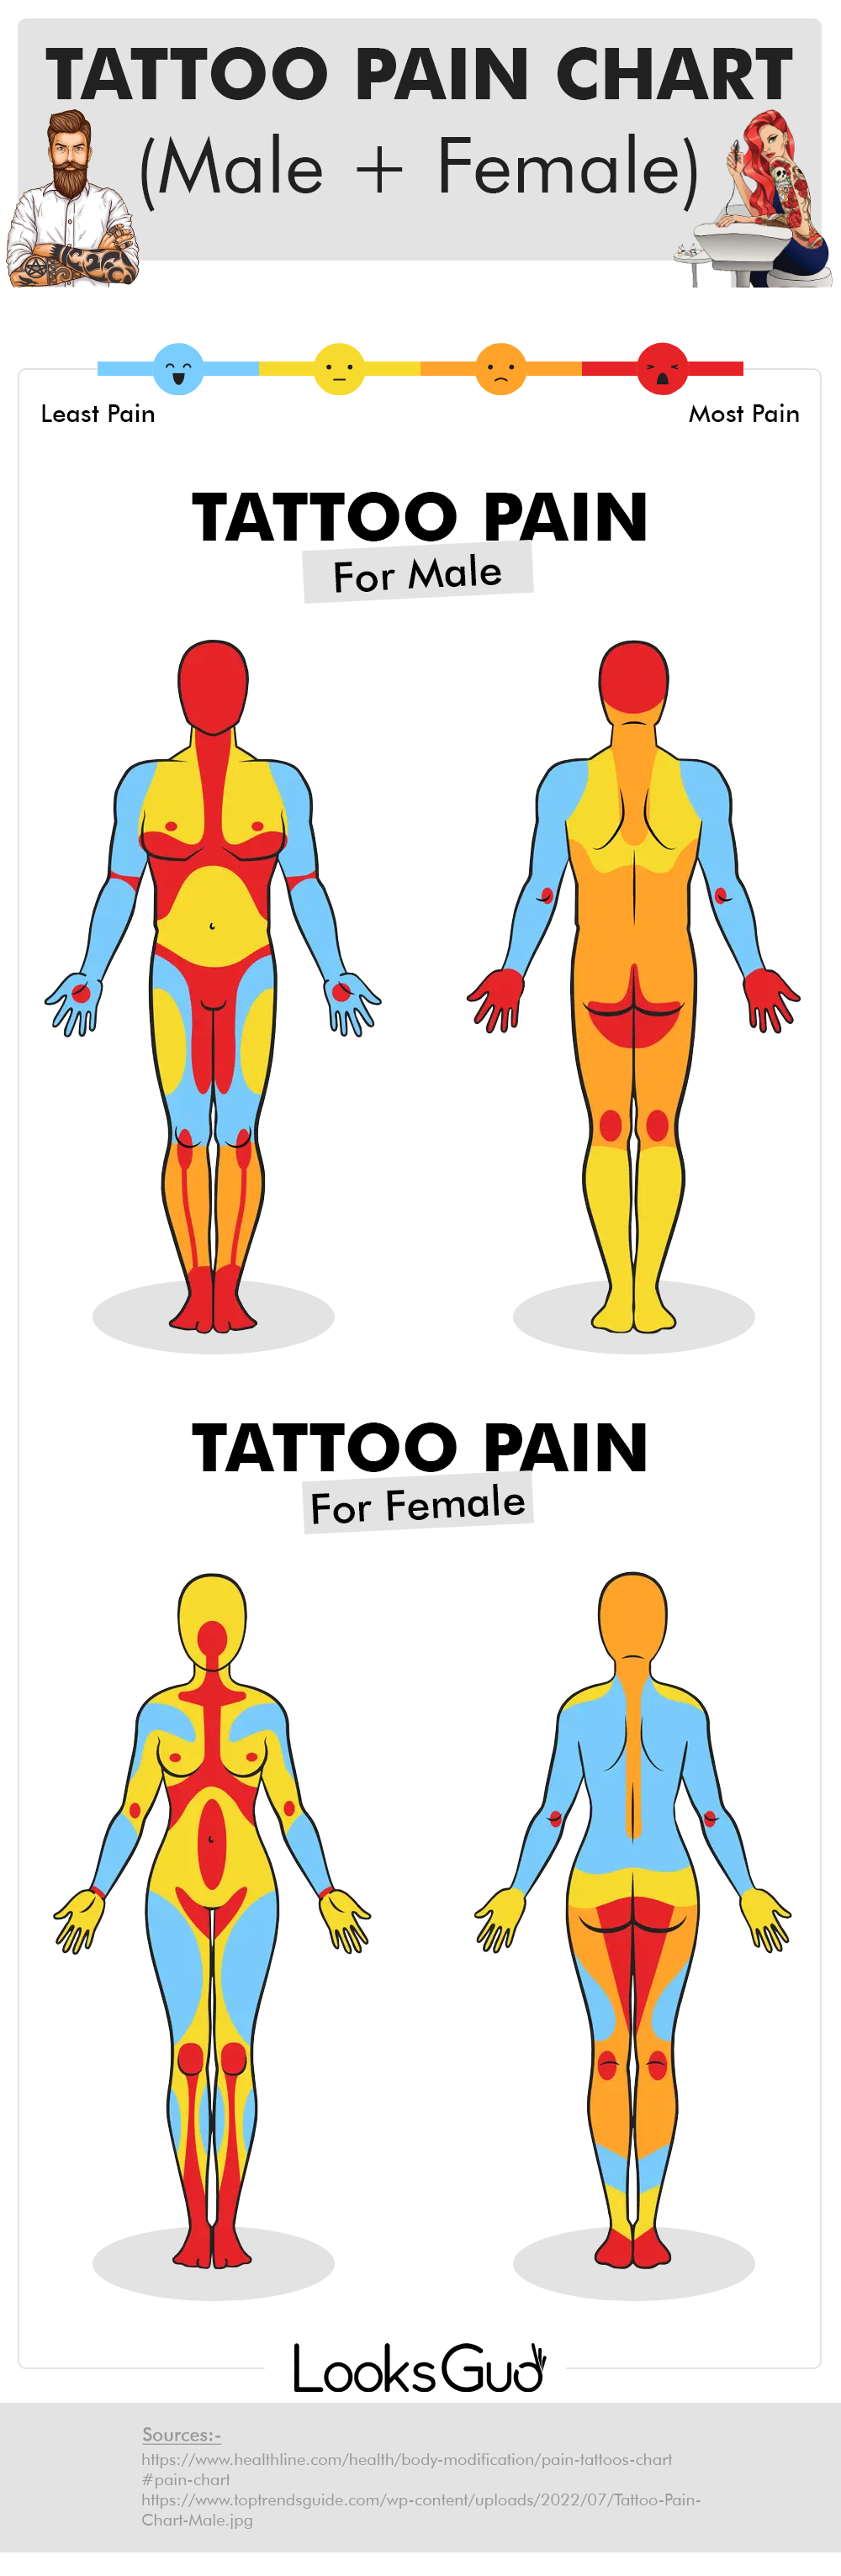 Does it hurt to get a tattoo on the front neck? - Quora